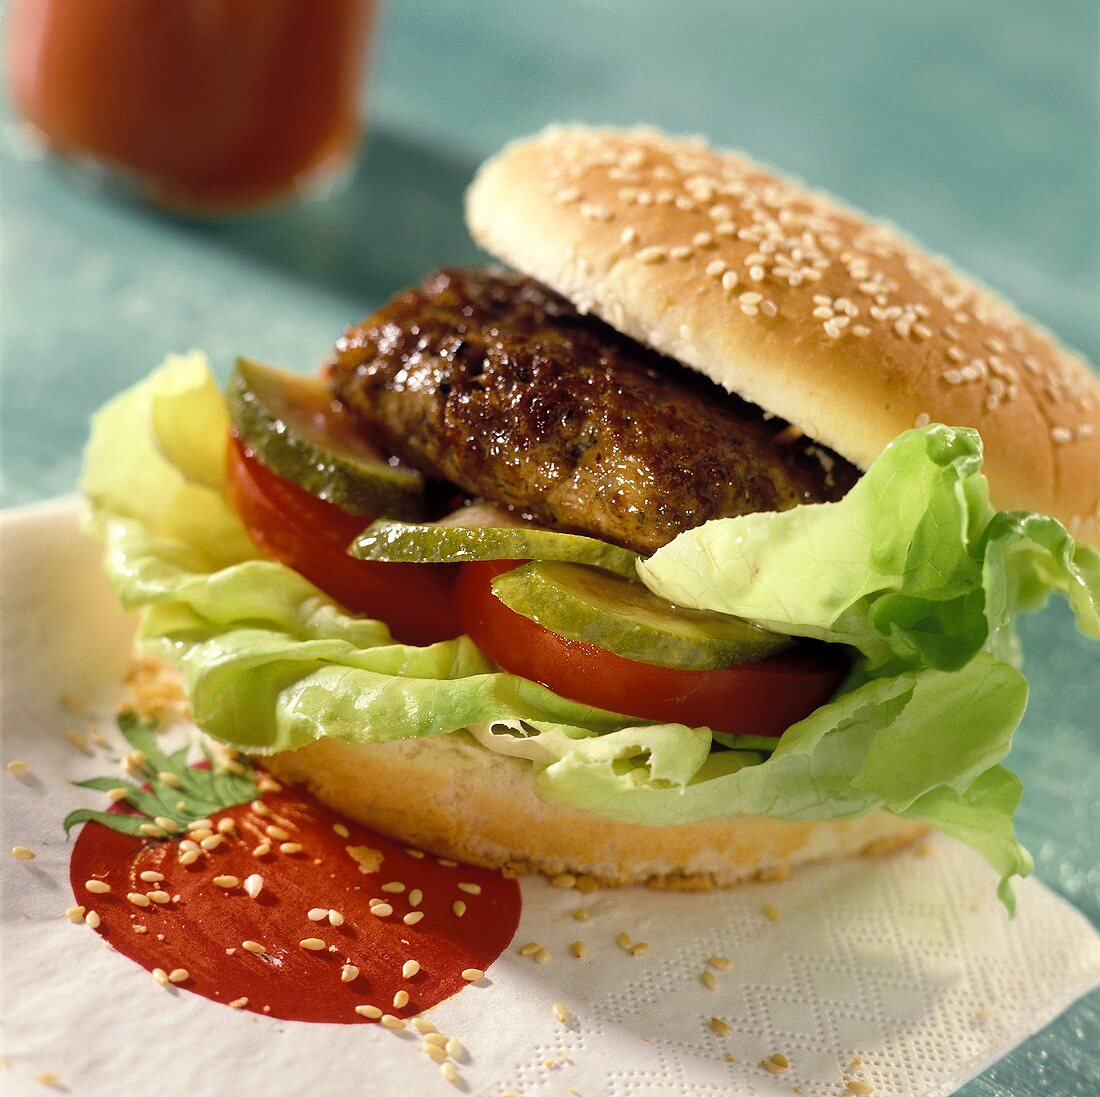 Hamburger with tomatoes, gherkin, lettuce on a napkin